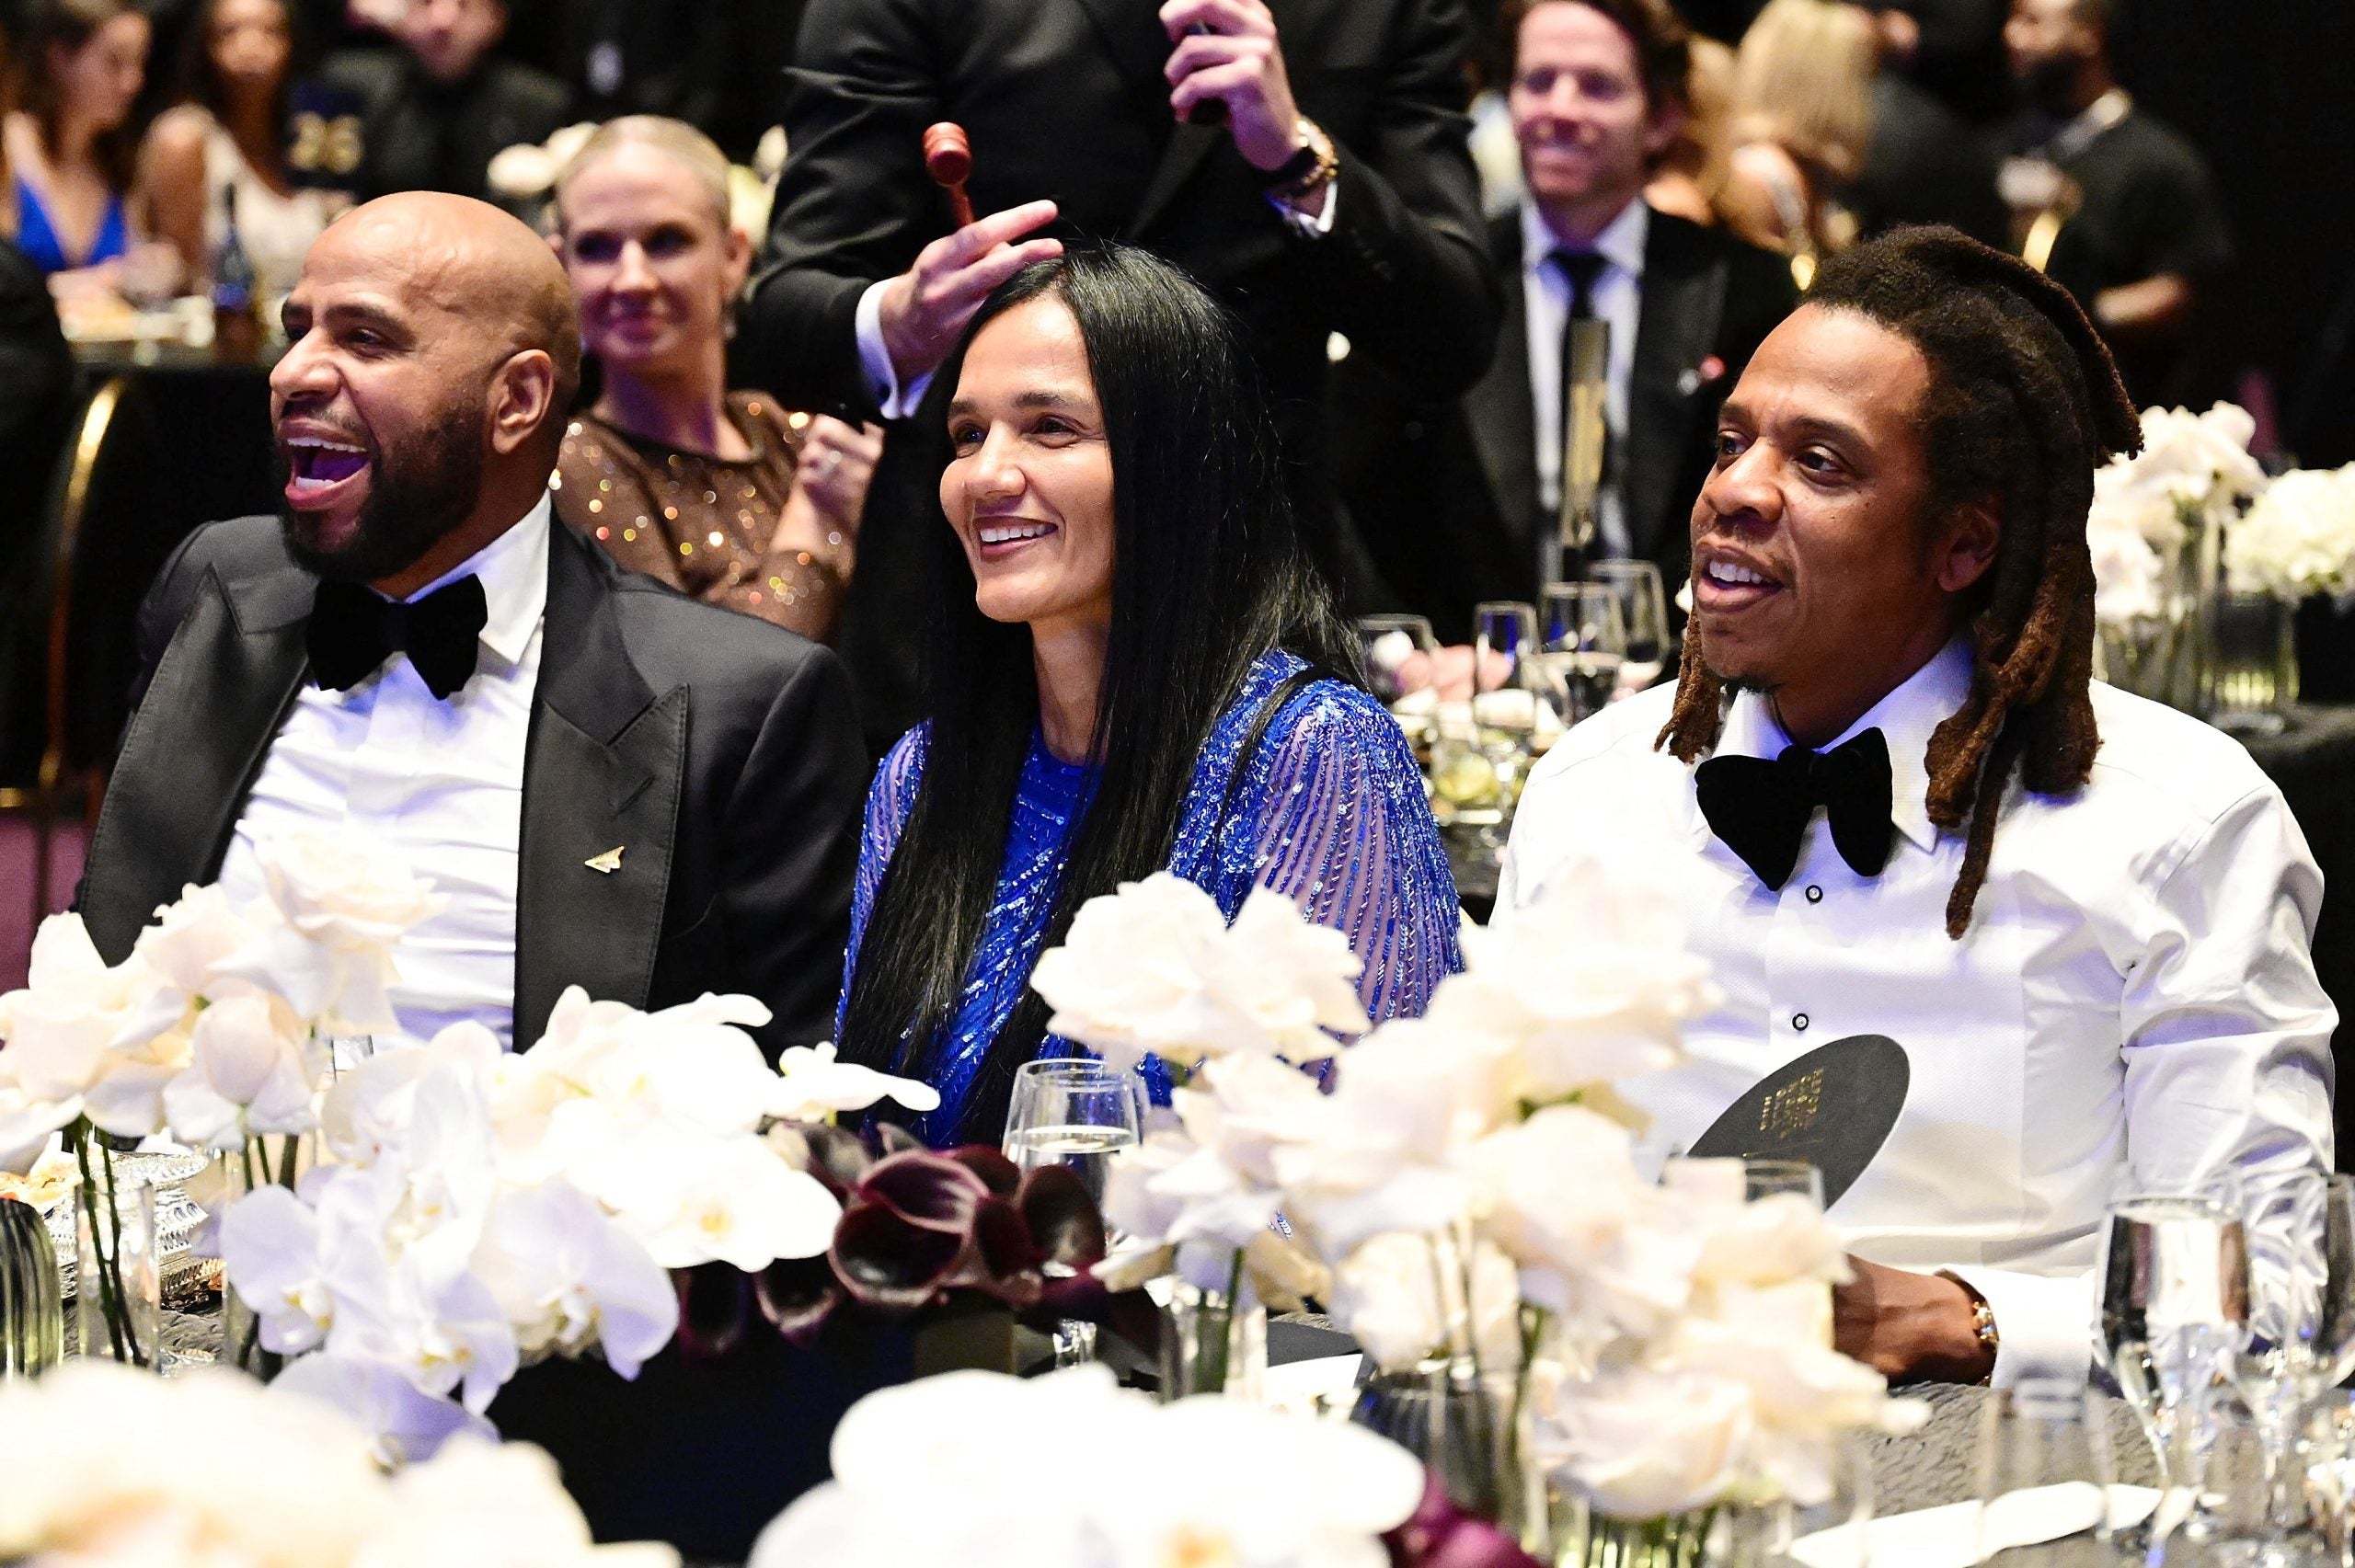 Jay-Z And Meek Mill Host Exclusive Casino Night Fundraiser For Criminal Justice. See The Stars Inside!